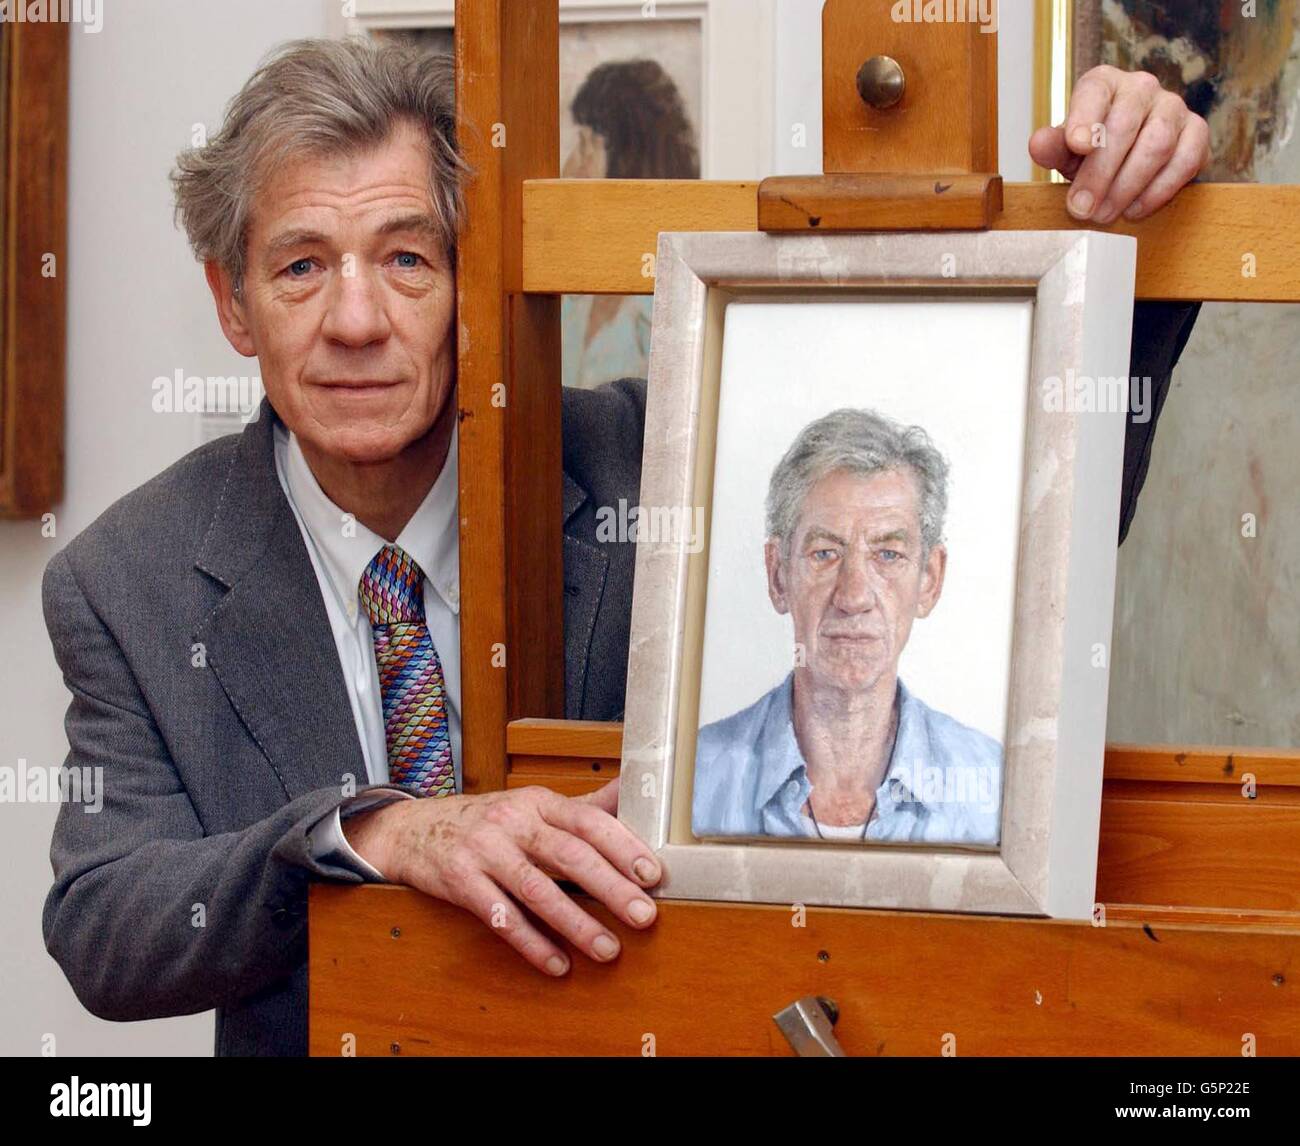 British actor Sir Ian McKellen with a new portrait of himself by Clive Smith during a photocall at the National Portrait Gallery. The work will go on public display from Wednesday 27 February 2002. The work has been commissioned by the National Portrait Gallery, * from the artist, who is a previous winner of the BP Portrait Award, as part of this prize. Stock Photo